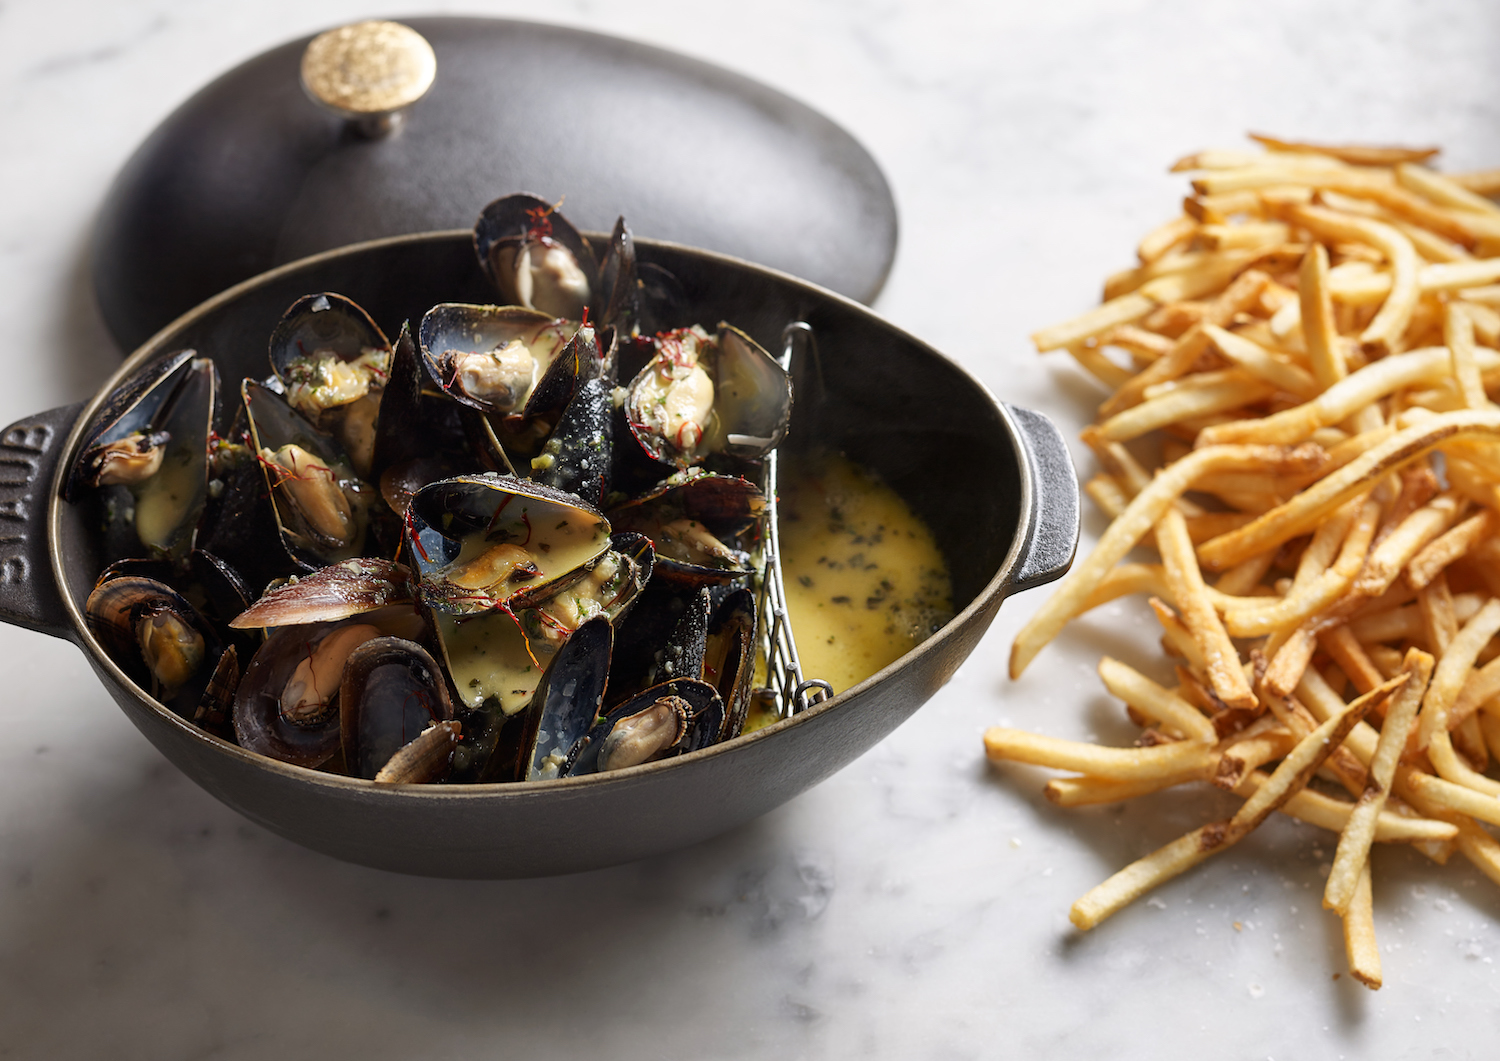 Moules au Safran | Maine bouchot mussels steamed with white wine, Dijon mustard & saffron, served with French fries